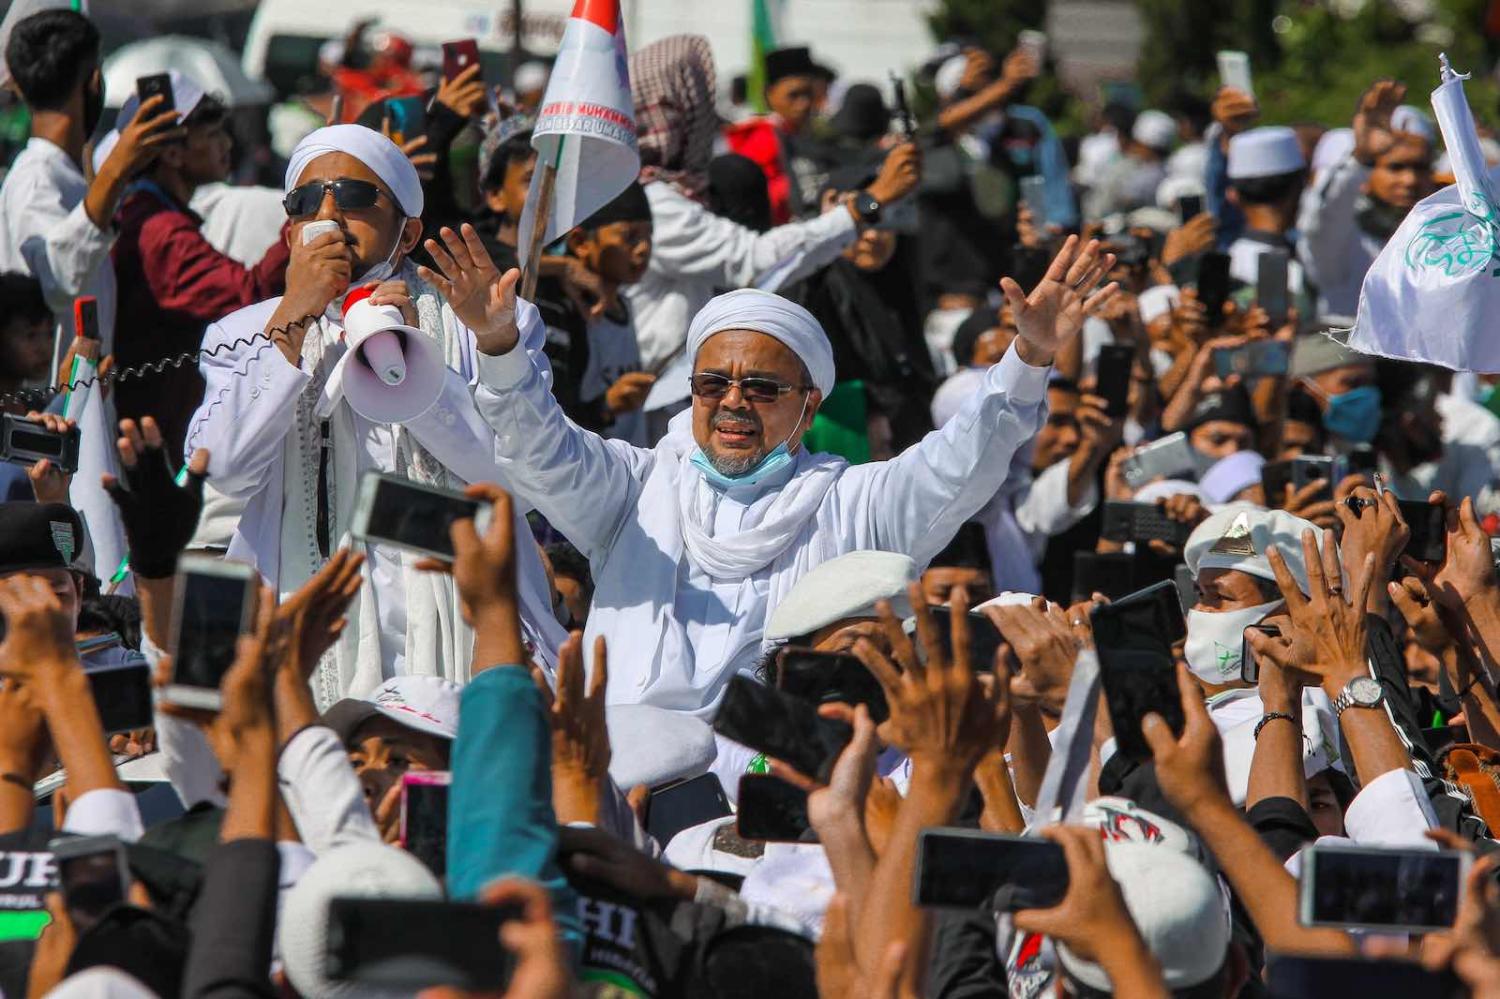 Muslim cleric Rizieq Shihab gestures to supporters as he arrives to inaugurate a mosque in Bogor, Indonesia, 13 November (Rangga Firmansyah/NurPhoto via Getty Images)